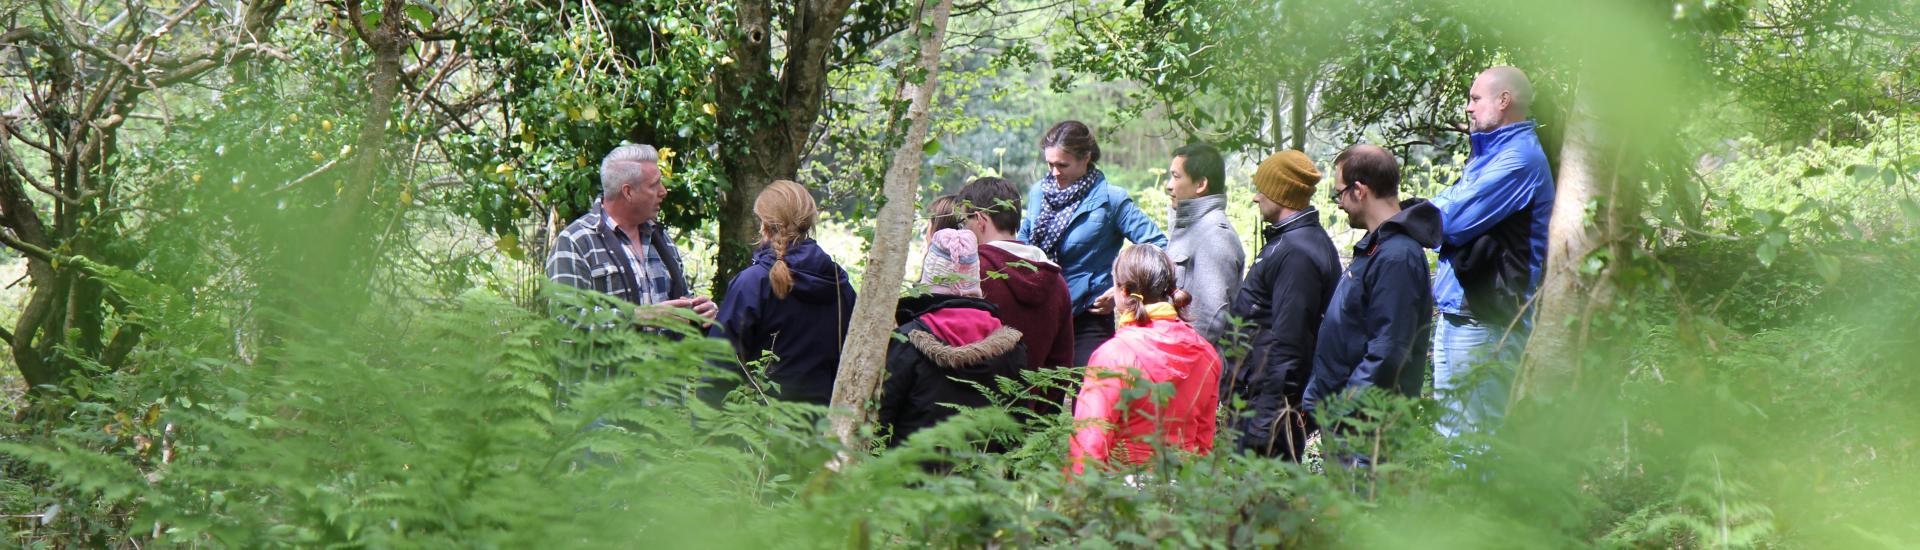 View of group of people through the trees in woodland